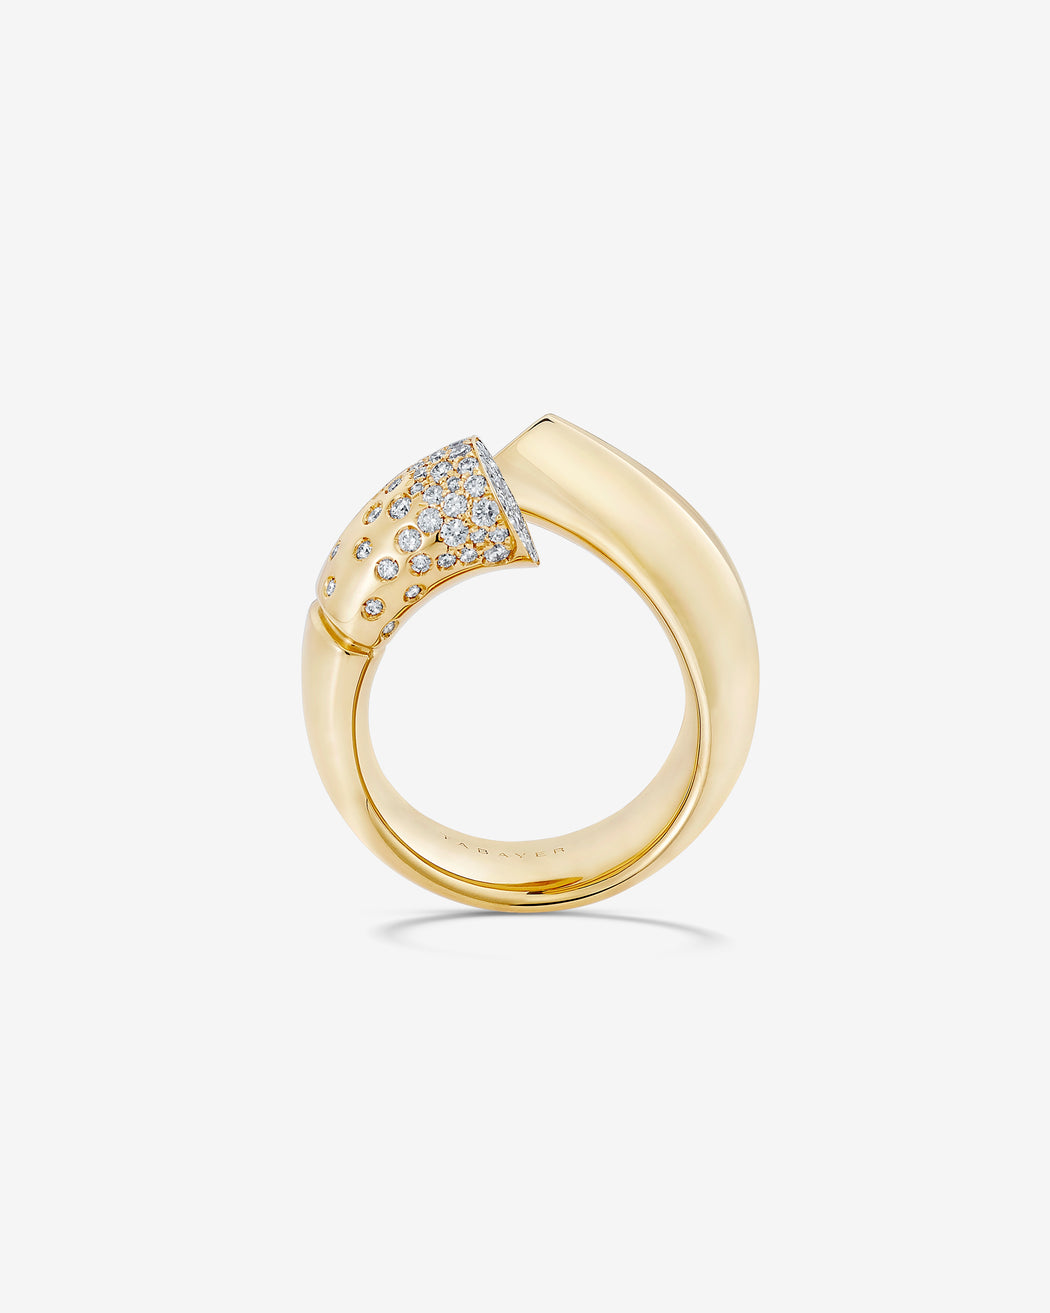 Oera ring 18k Fairmined yellow gold and diamonds, Tabayer ethical fine jewelry